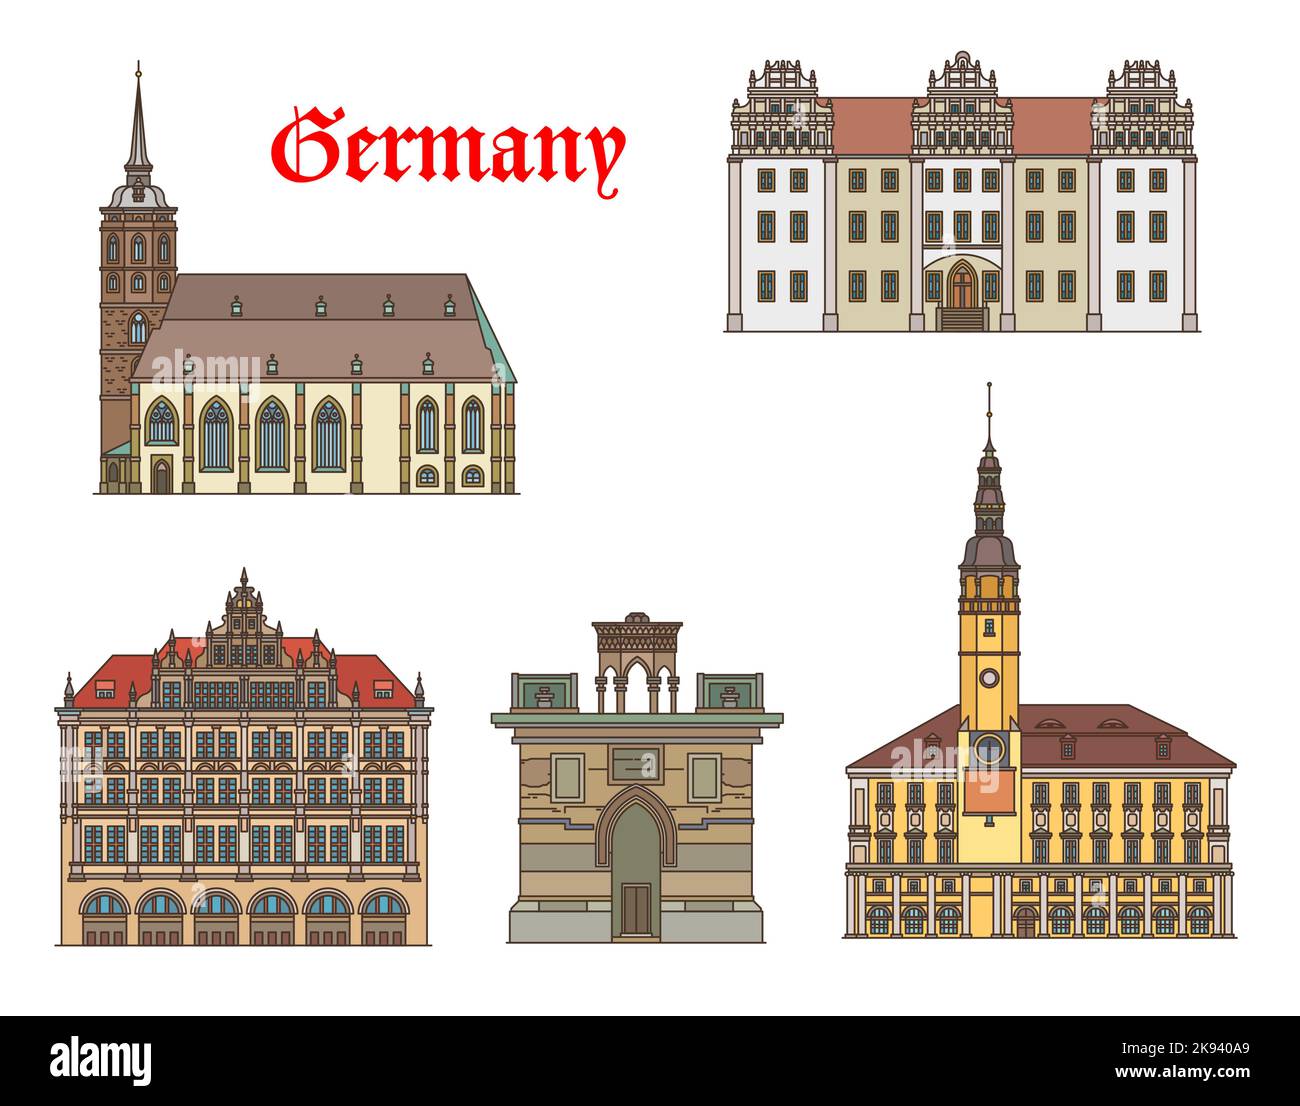 Germany buildings of Gorlitz and Bautzen, vector architecture. German travel landmark buildings of St Peter cathedral, Ortenburg castle and Holy Sepulchre, Rathaus or town hall in Saxony Stock Vector